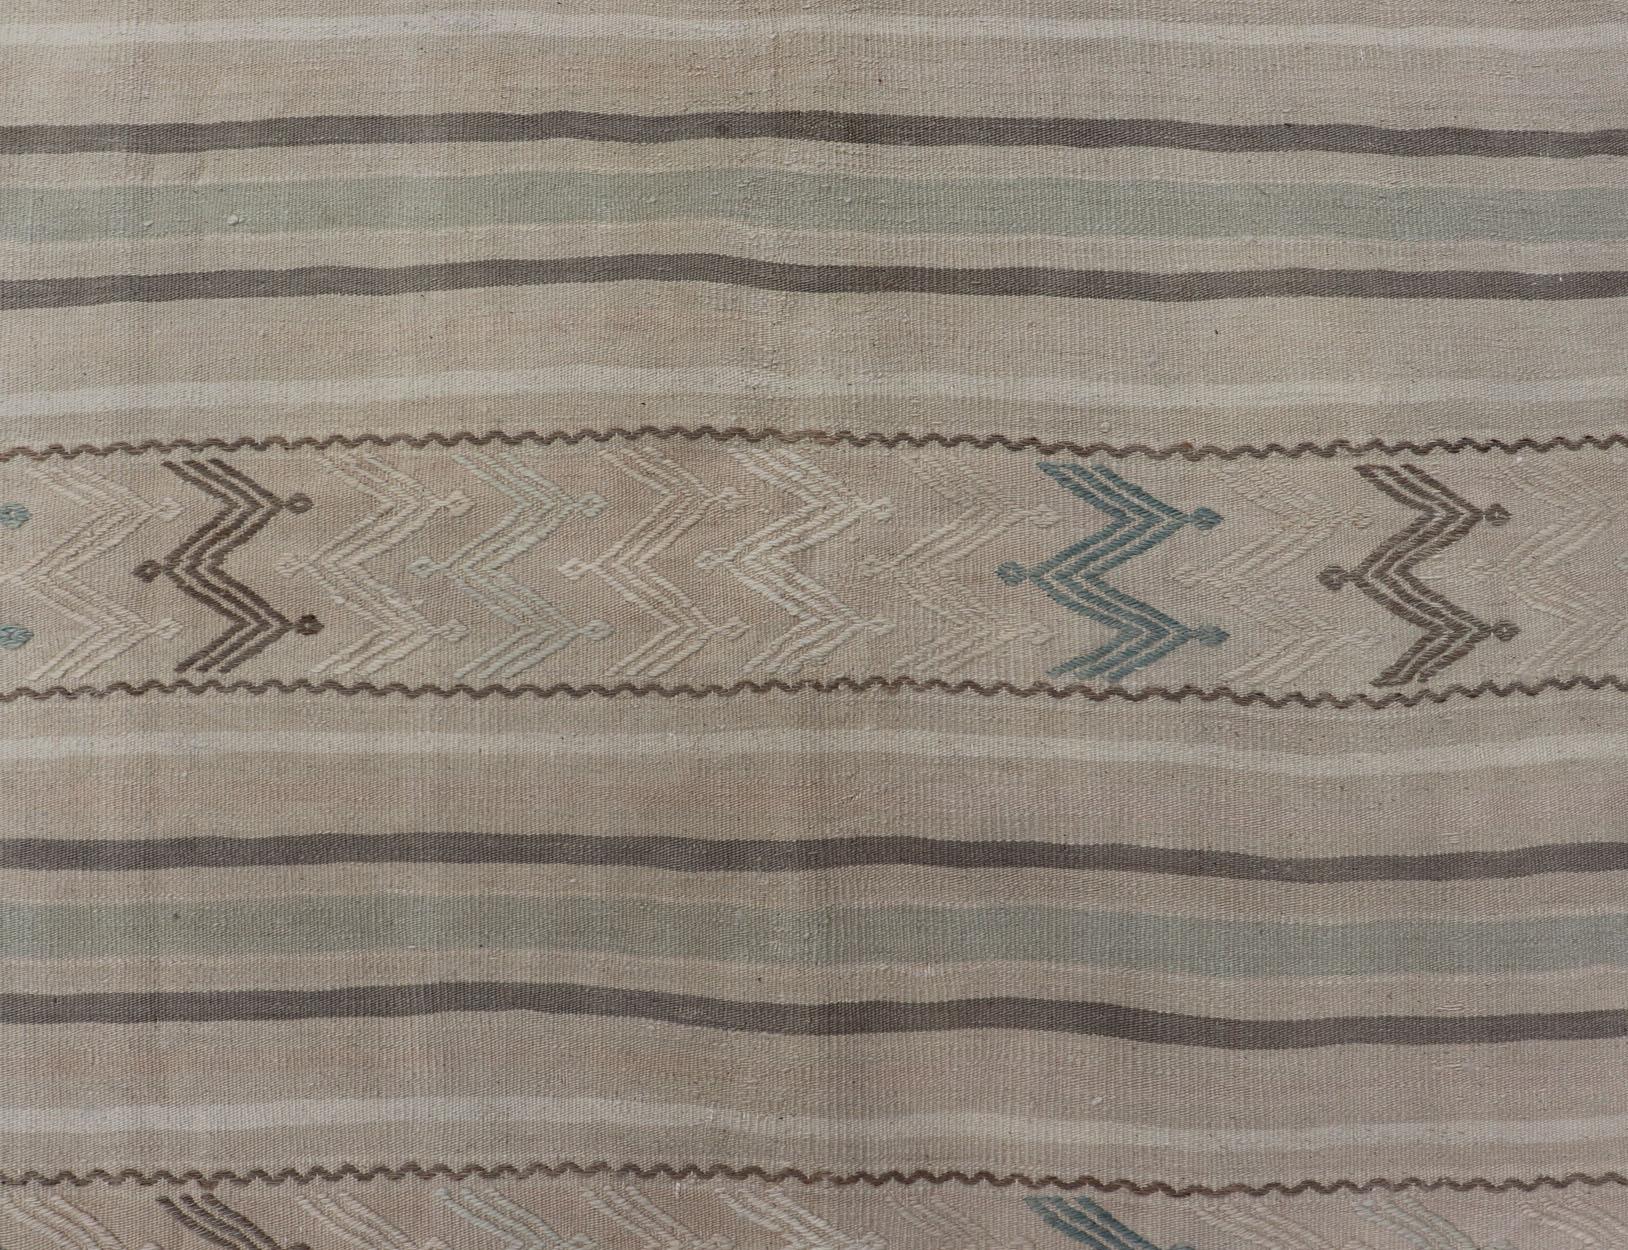 Vintage Turkish Flat-Weave Muted Colored Kilim in Taupe, Brown and Light Blue For Sale 3